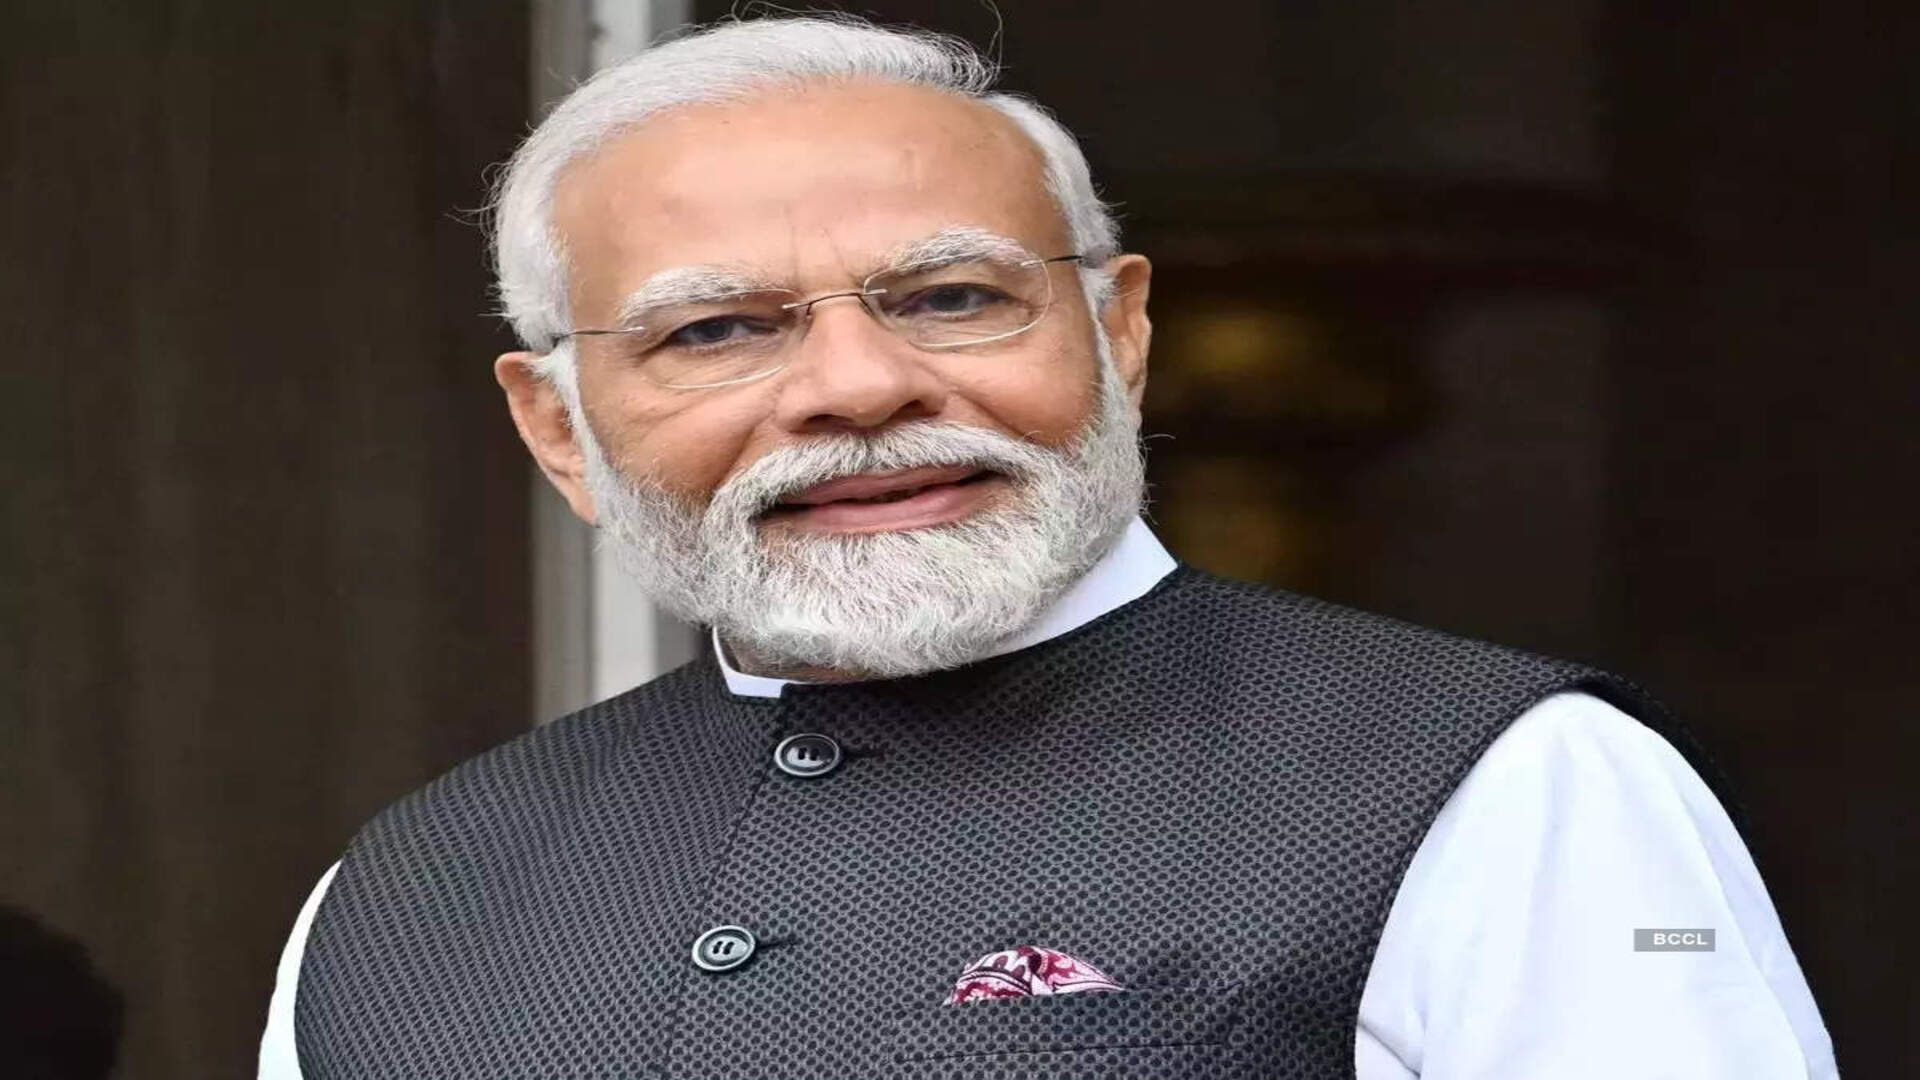 PM Modi to launch several development projects in Telangana, Tamil Nadu today